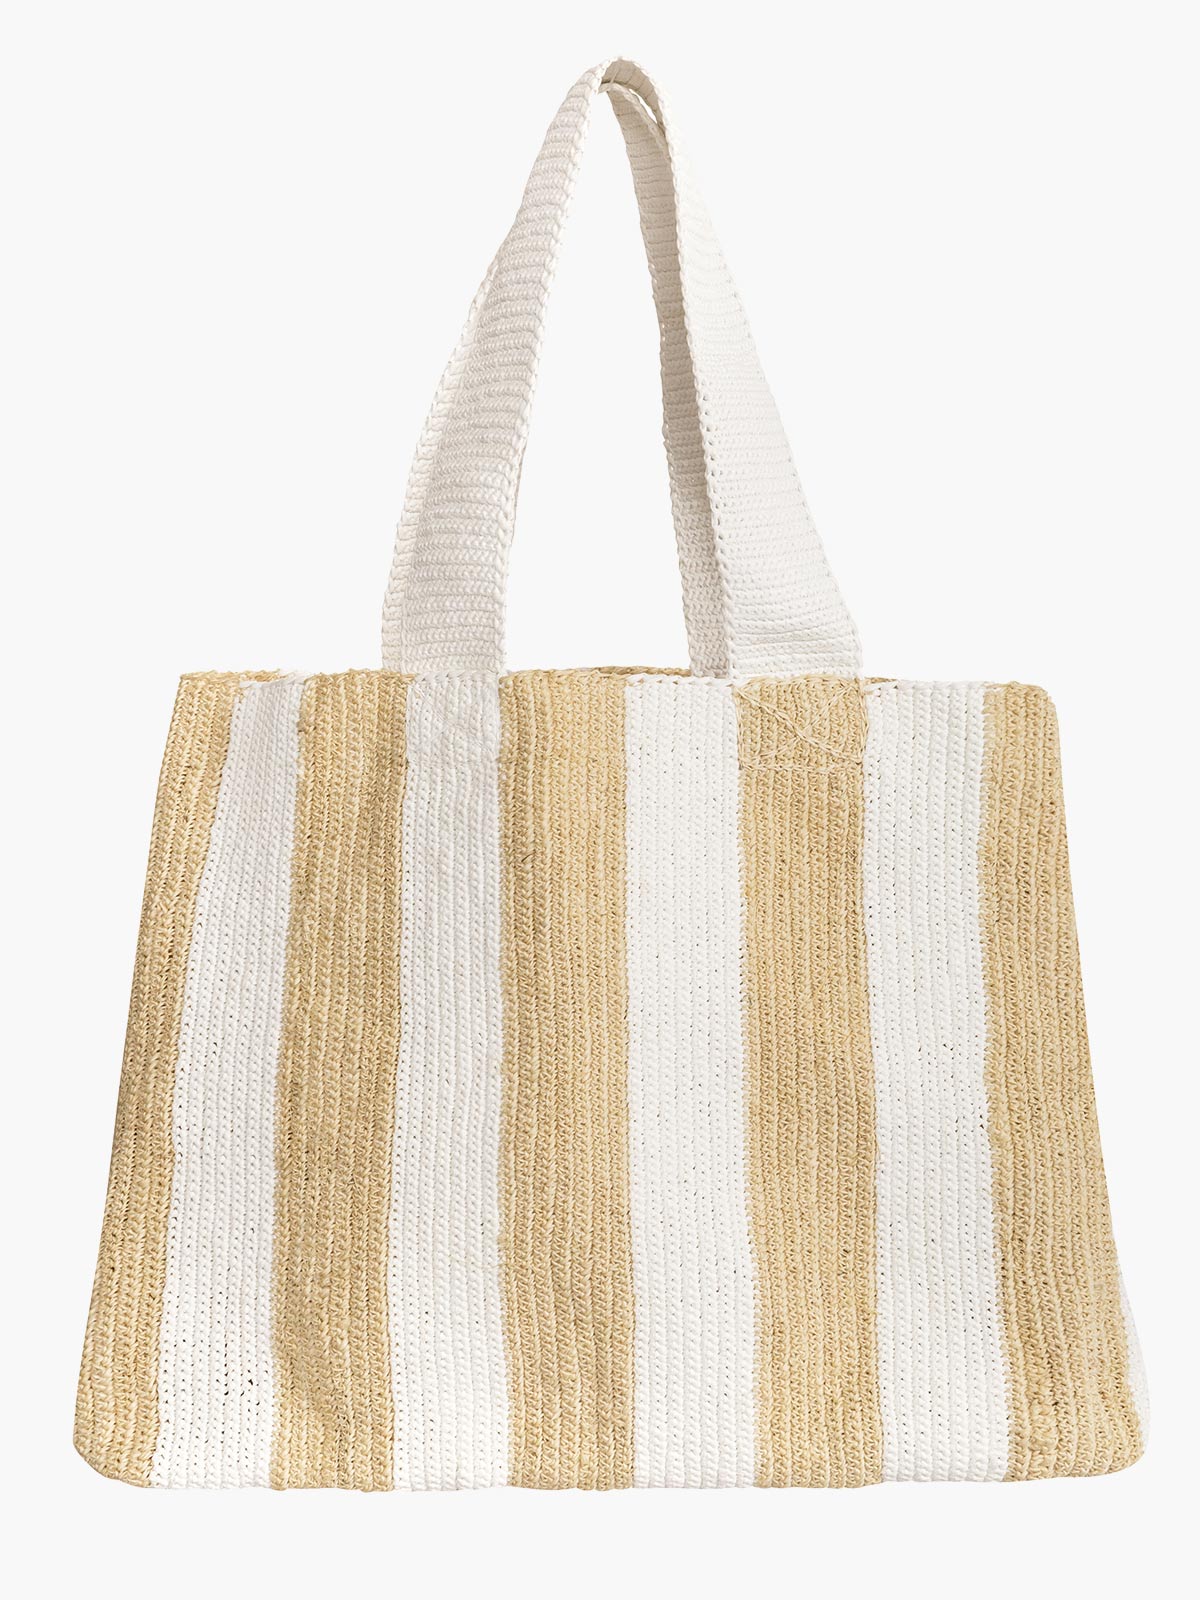 Recycled Plastic Beach Bag | Natural/White